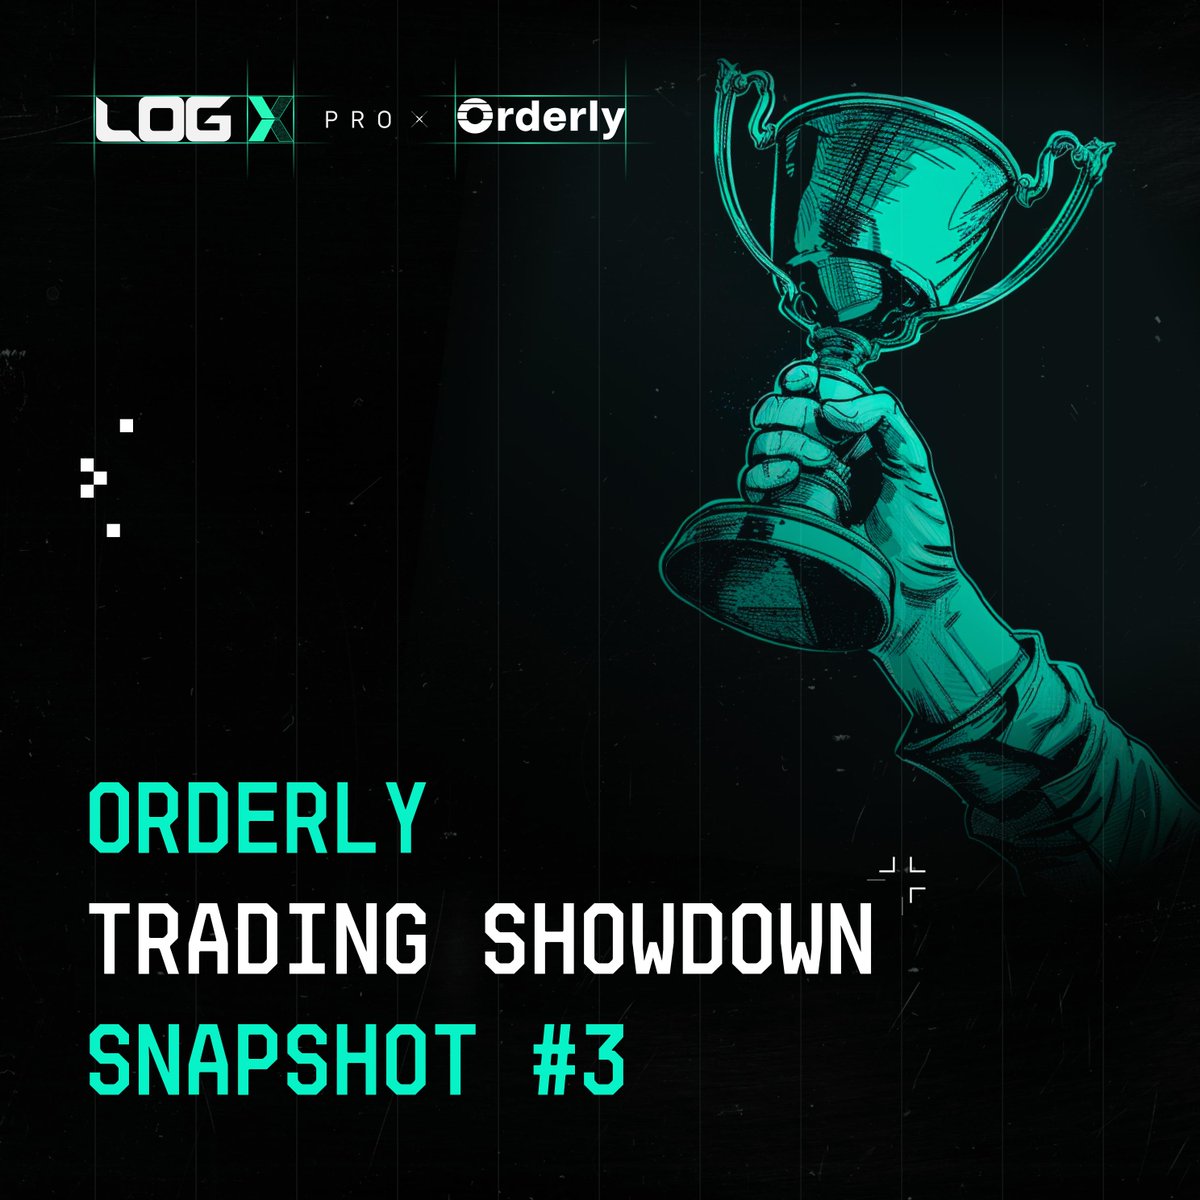 FEW HOURS LEFT for @OrderlyNetwork Trading Showdown Weekly Snapshot #3 📸 Pay attention because: • Every trade you make on @LogX_Pro gets you Orderly Merits & $LOGX • The top 100 traders at time of snapshot will get a share of 100,000 bonus $LOGX tokens